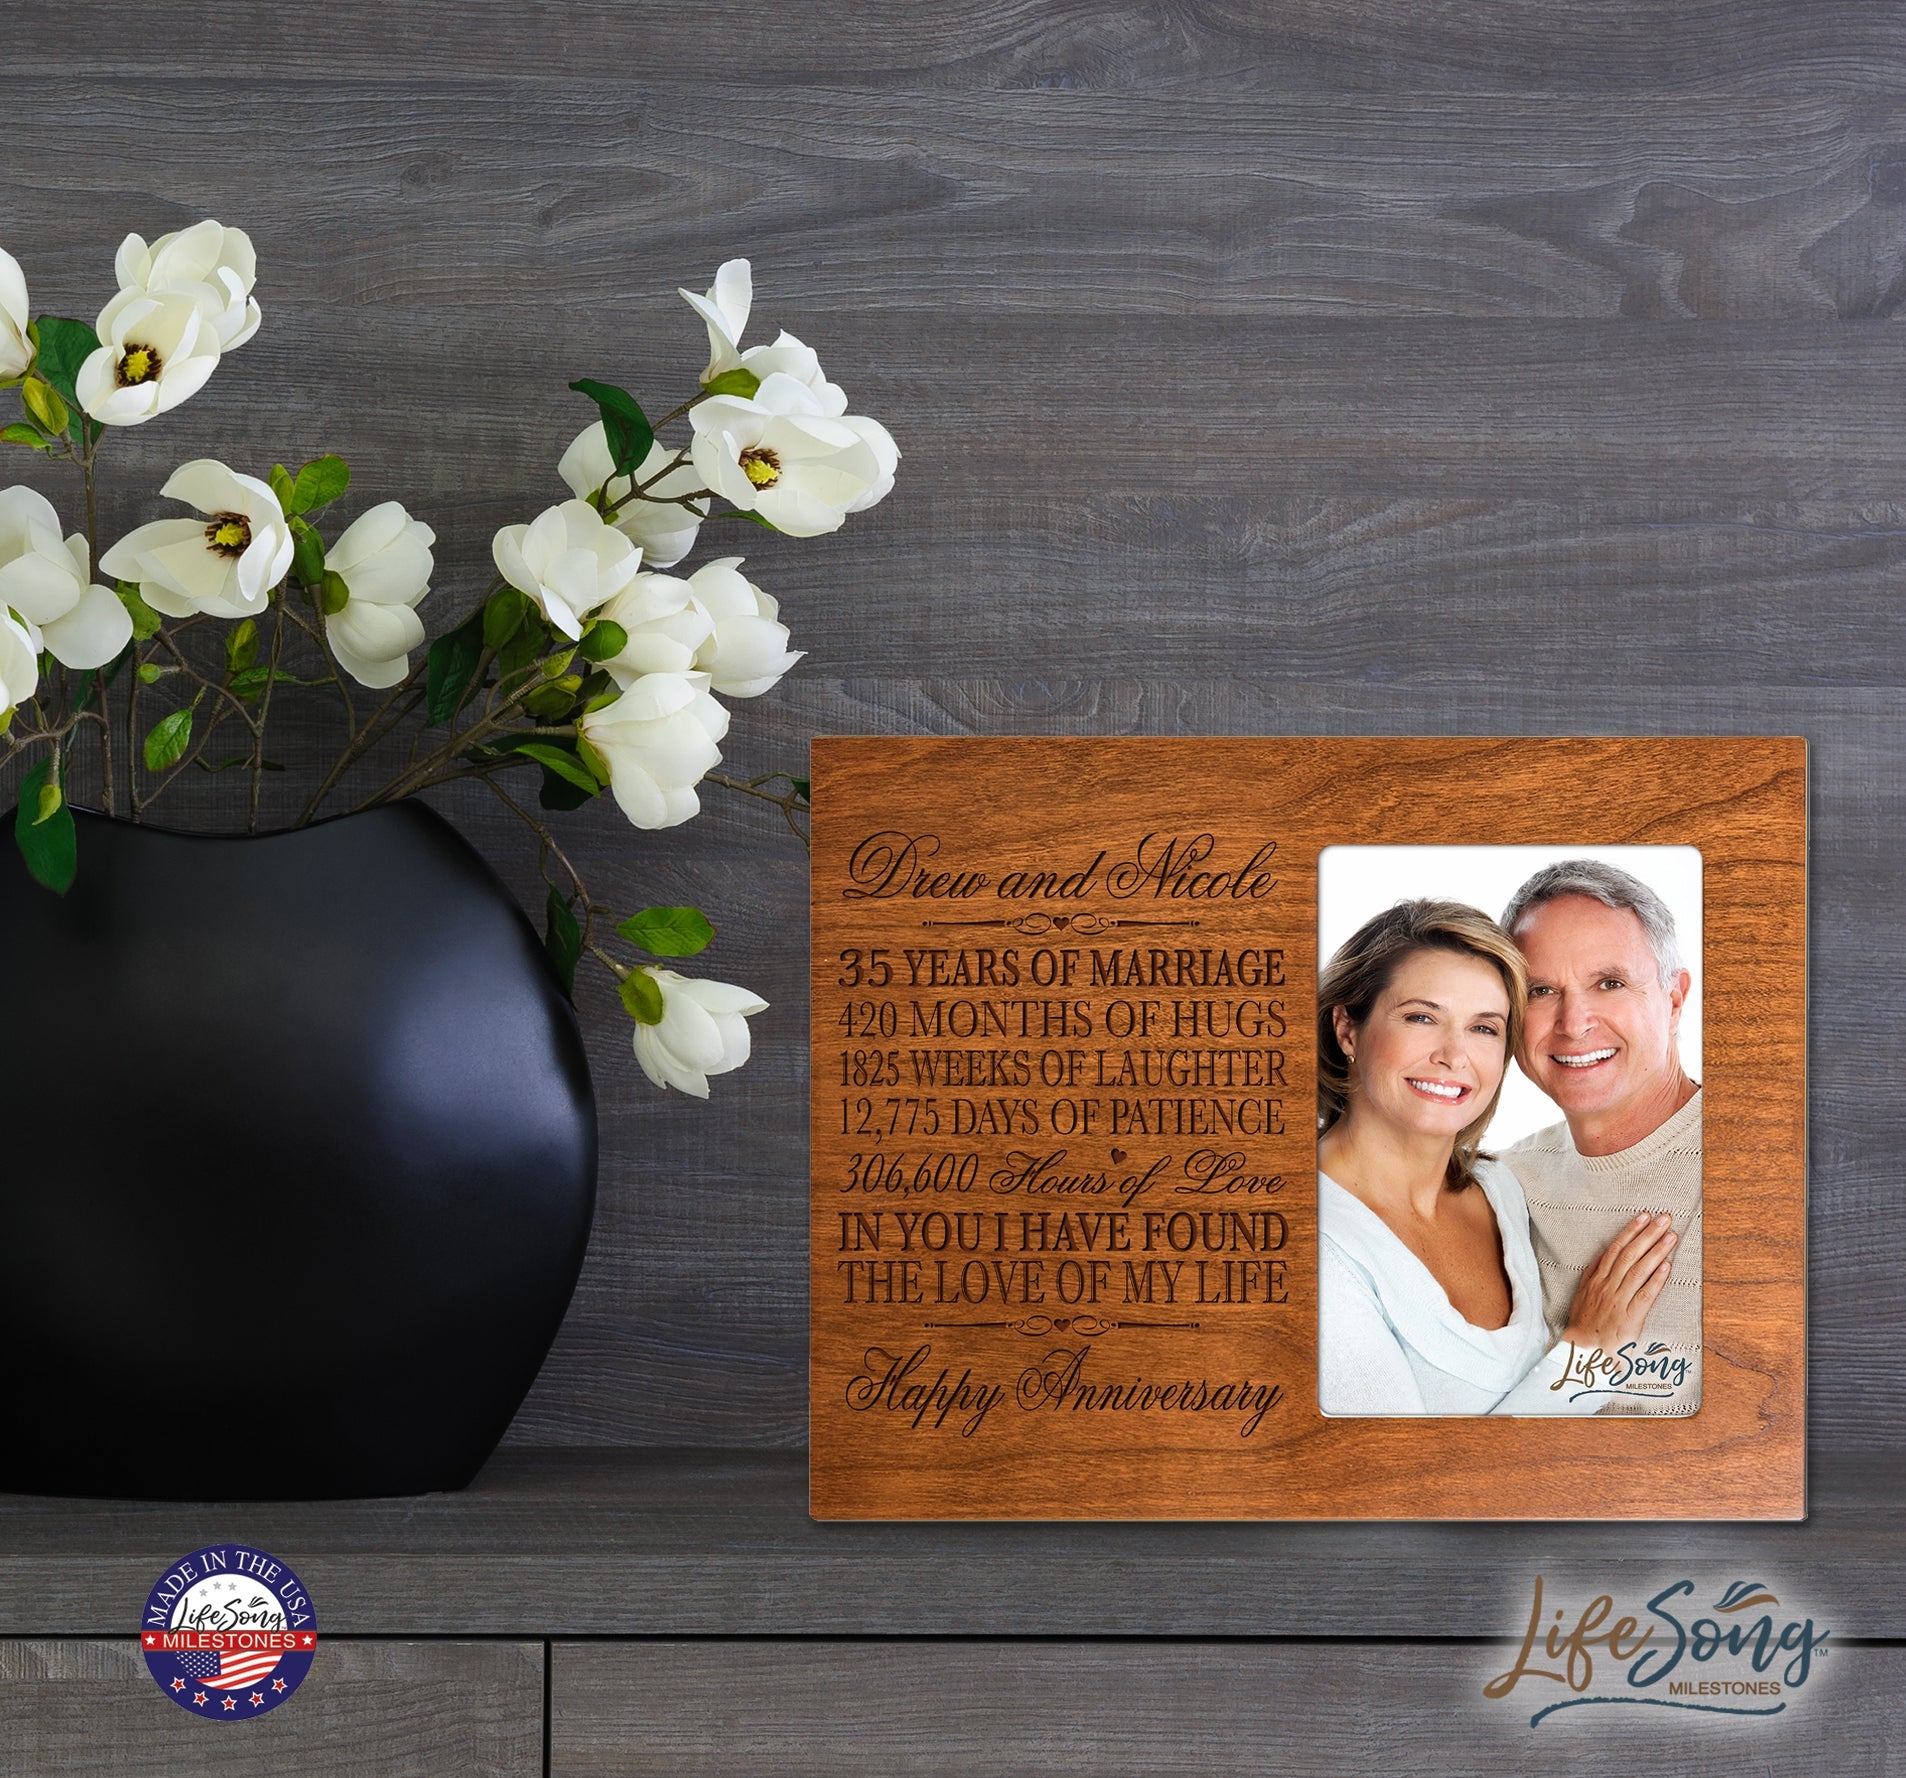 Lifesong Milestones Personalized 35th Wedding Anniversary Picture Frame Wall Decor